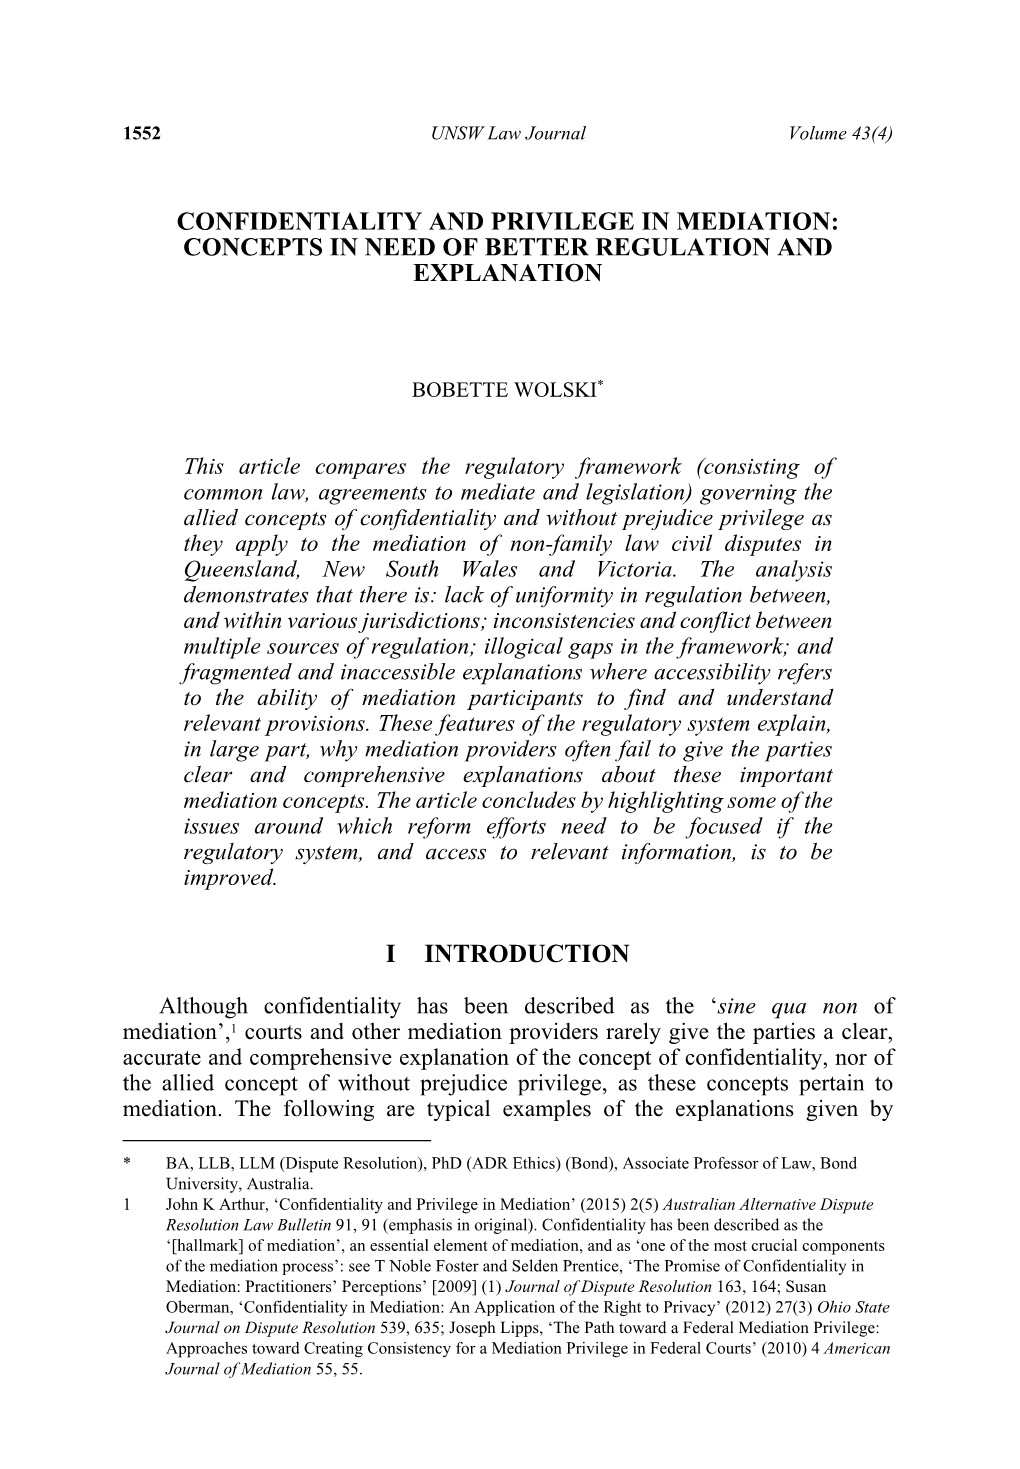 Confidentiality and Privilege in Mediation: Concepts in Need of Better Regulation and Explanation